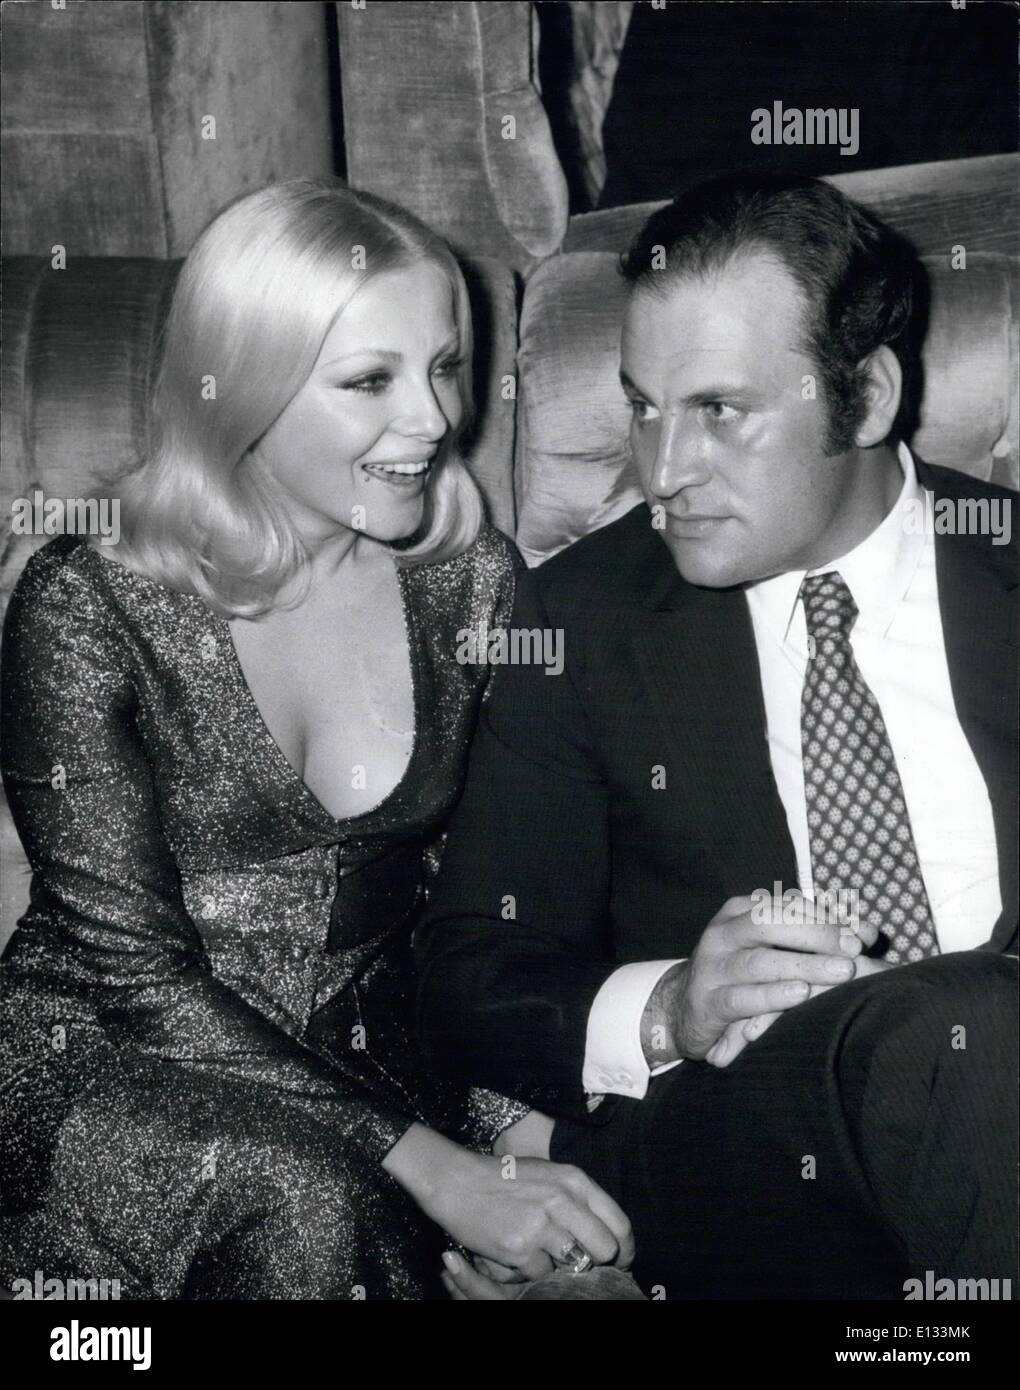 Feb. 26, 2012 - Great part offered by the well-know press agent Enrico Lucherini, at the occasion of 10th anniversary of his activity on the world of the screen. Photo shows blonde actress Virna Lisi, and her husband Franco Pesci. Stock Photo